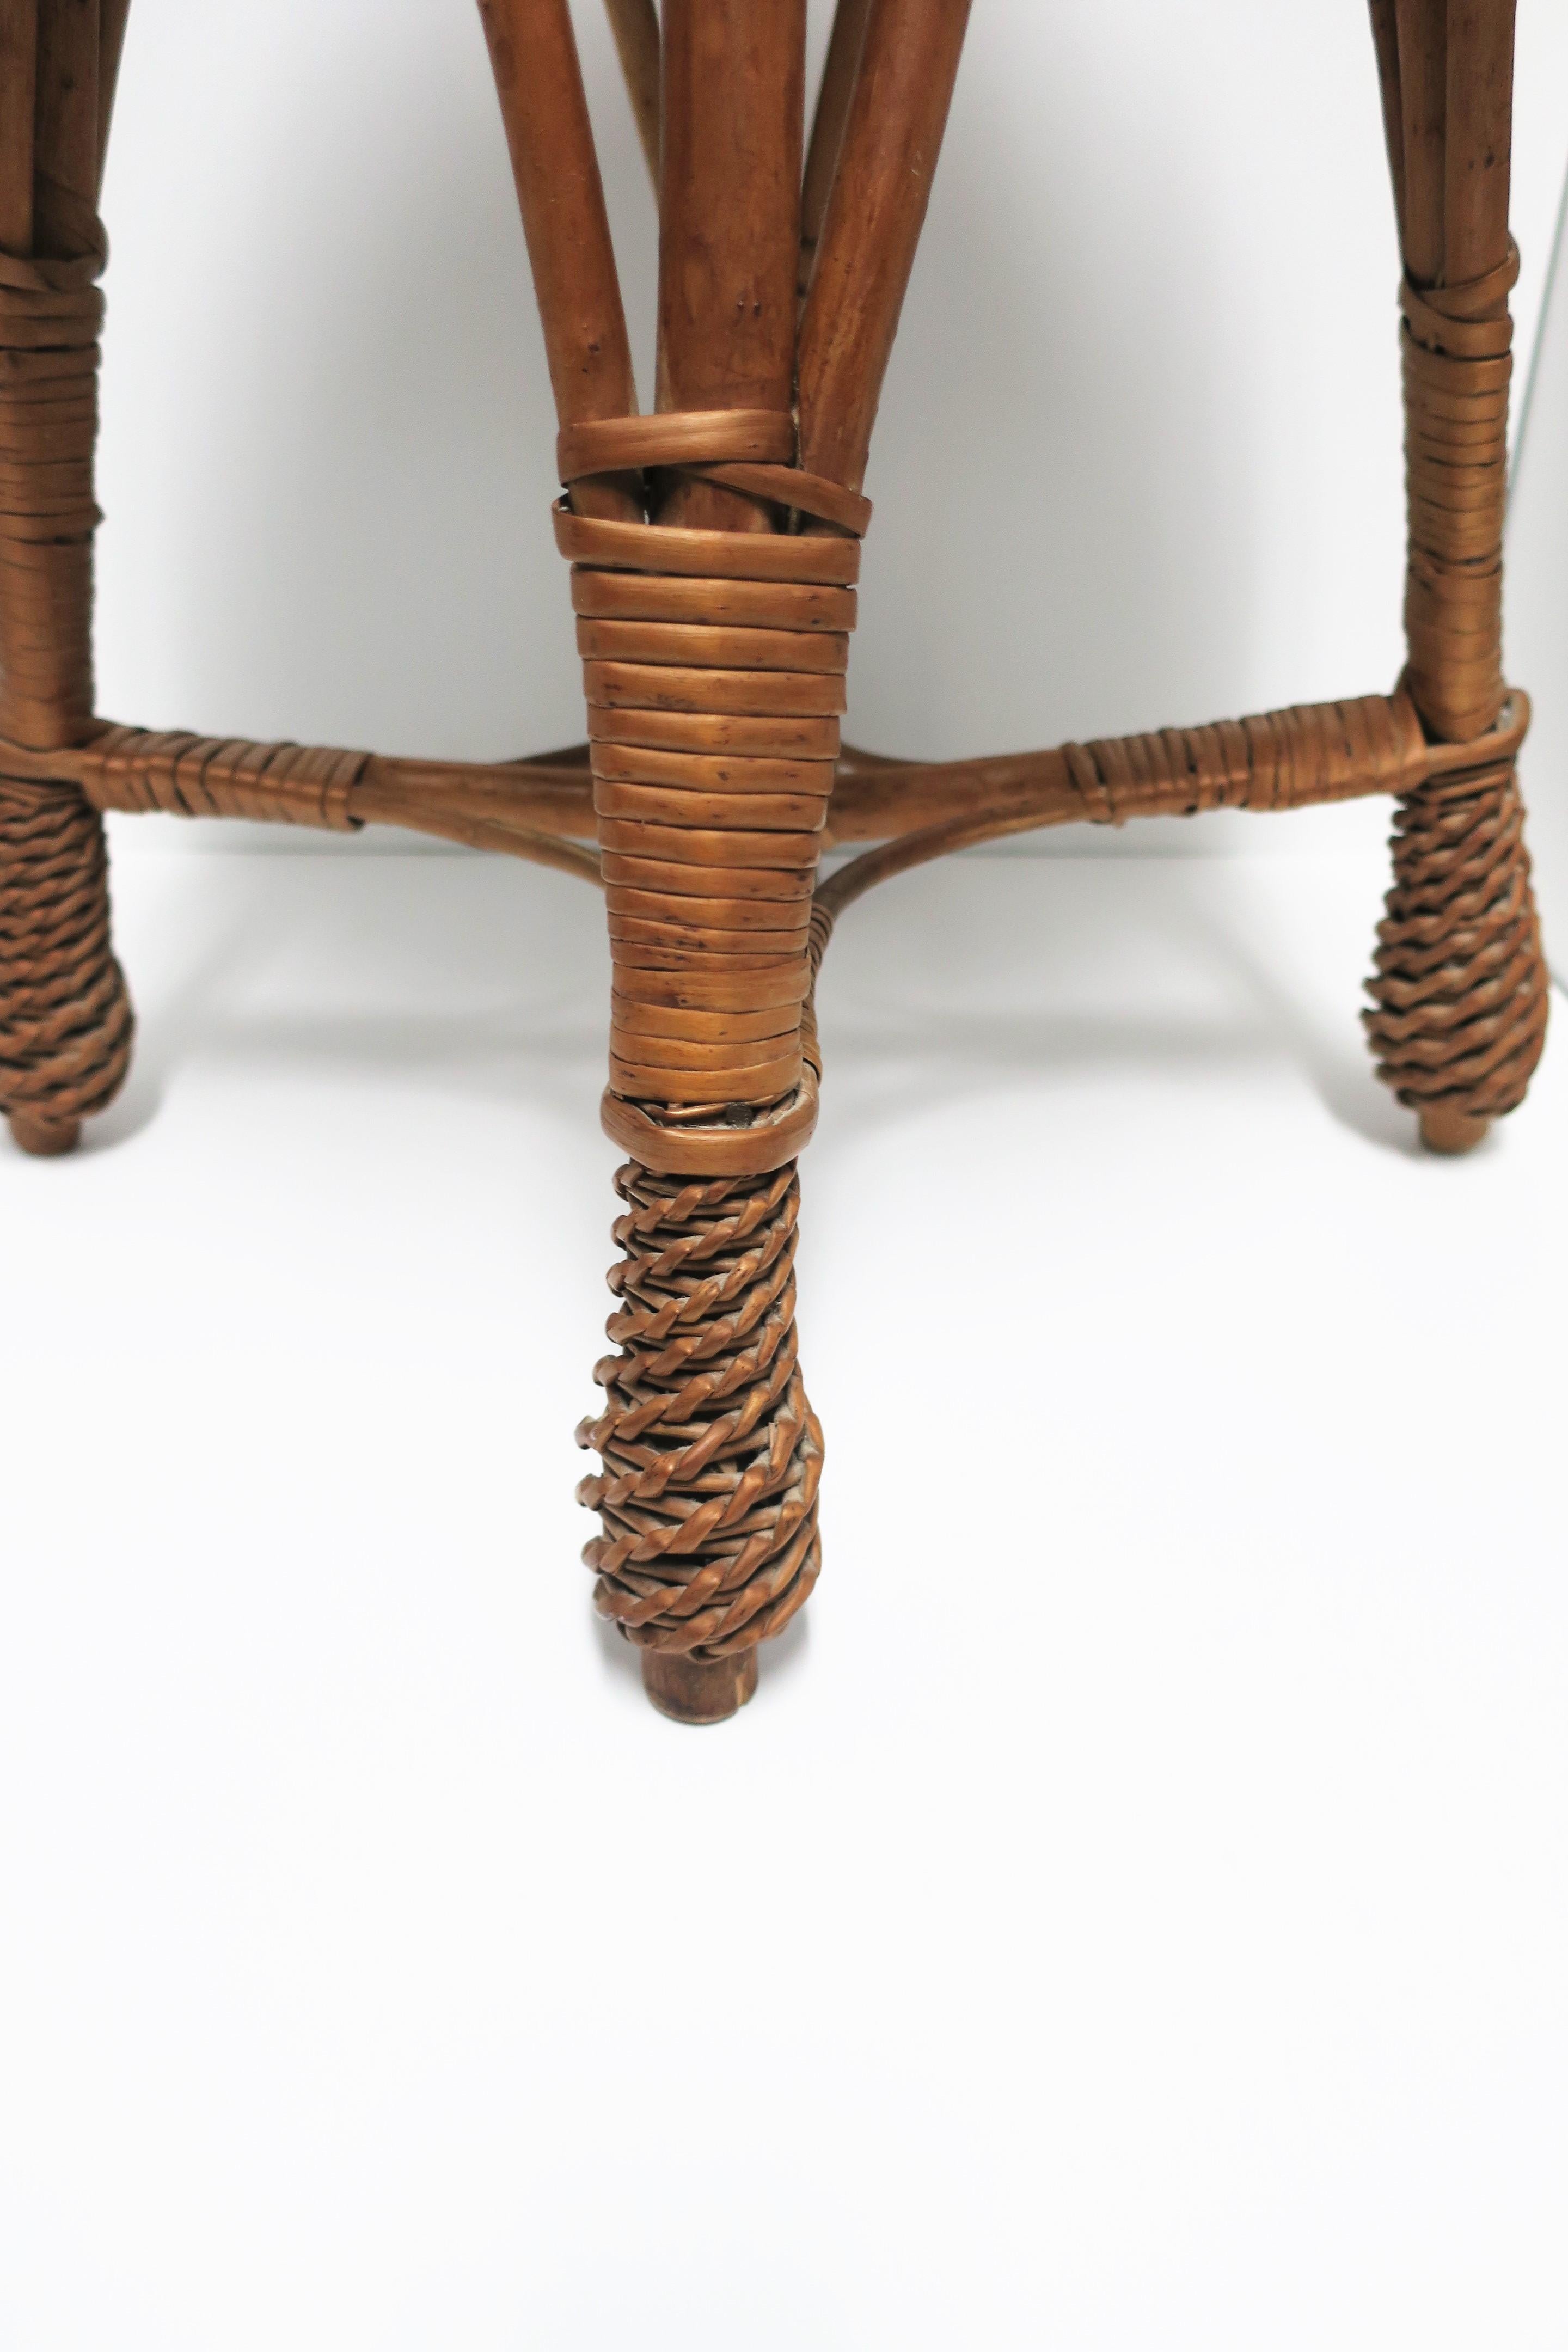 20th Century Wicker Rattan and Wood Stool